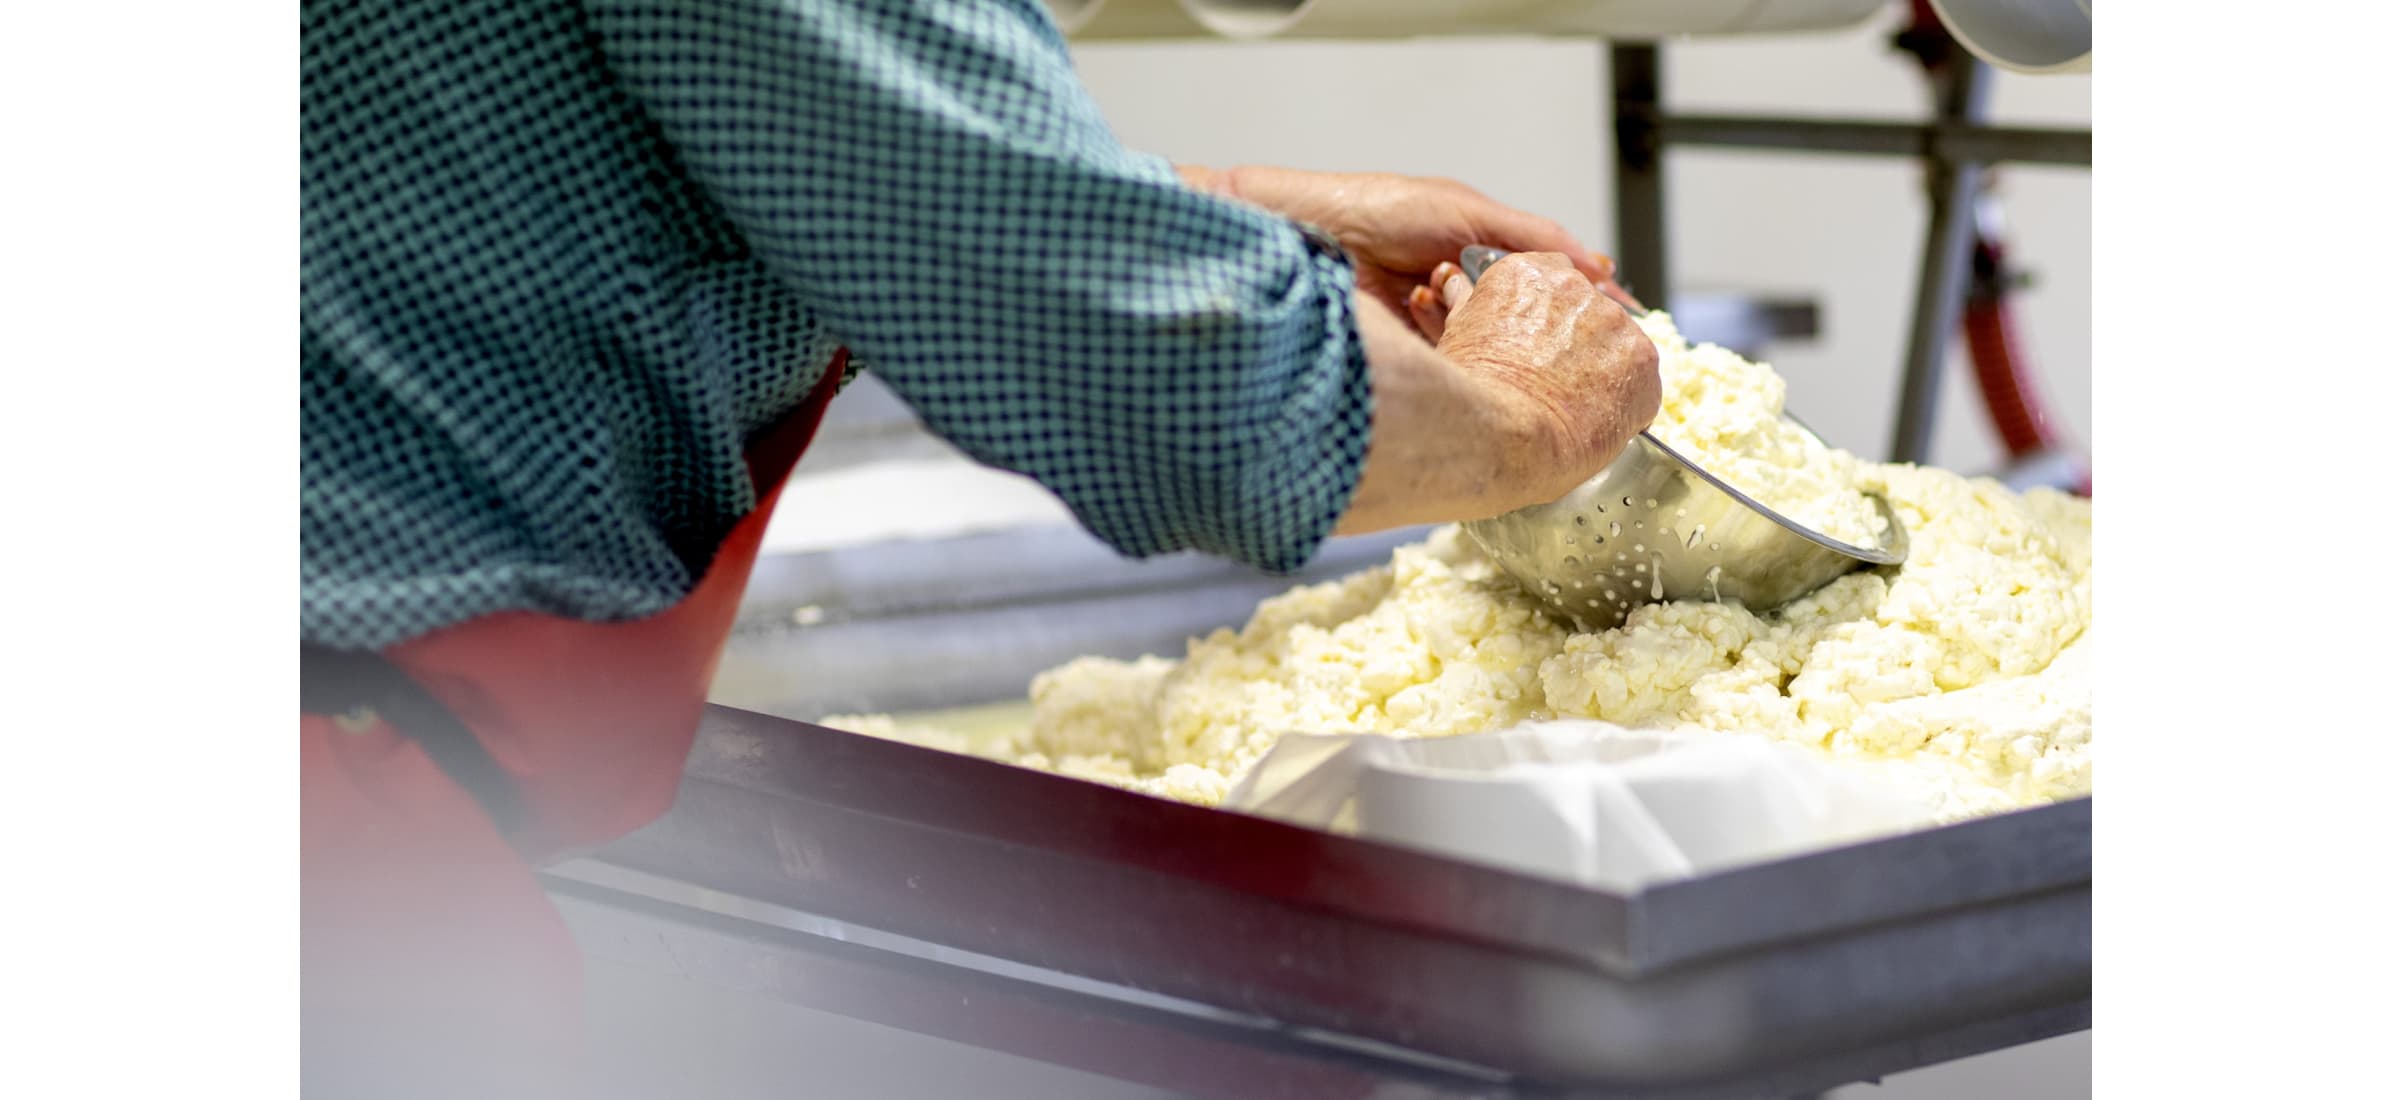 Close-up of hands showing the process of making cheese by moving it around with a bowl and tray.